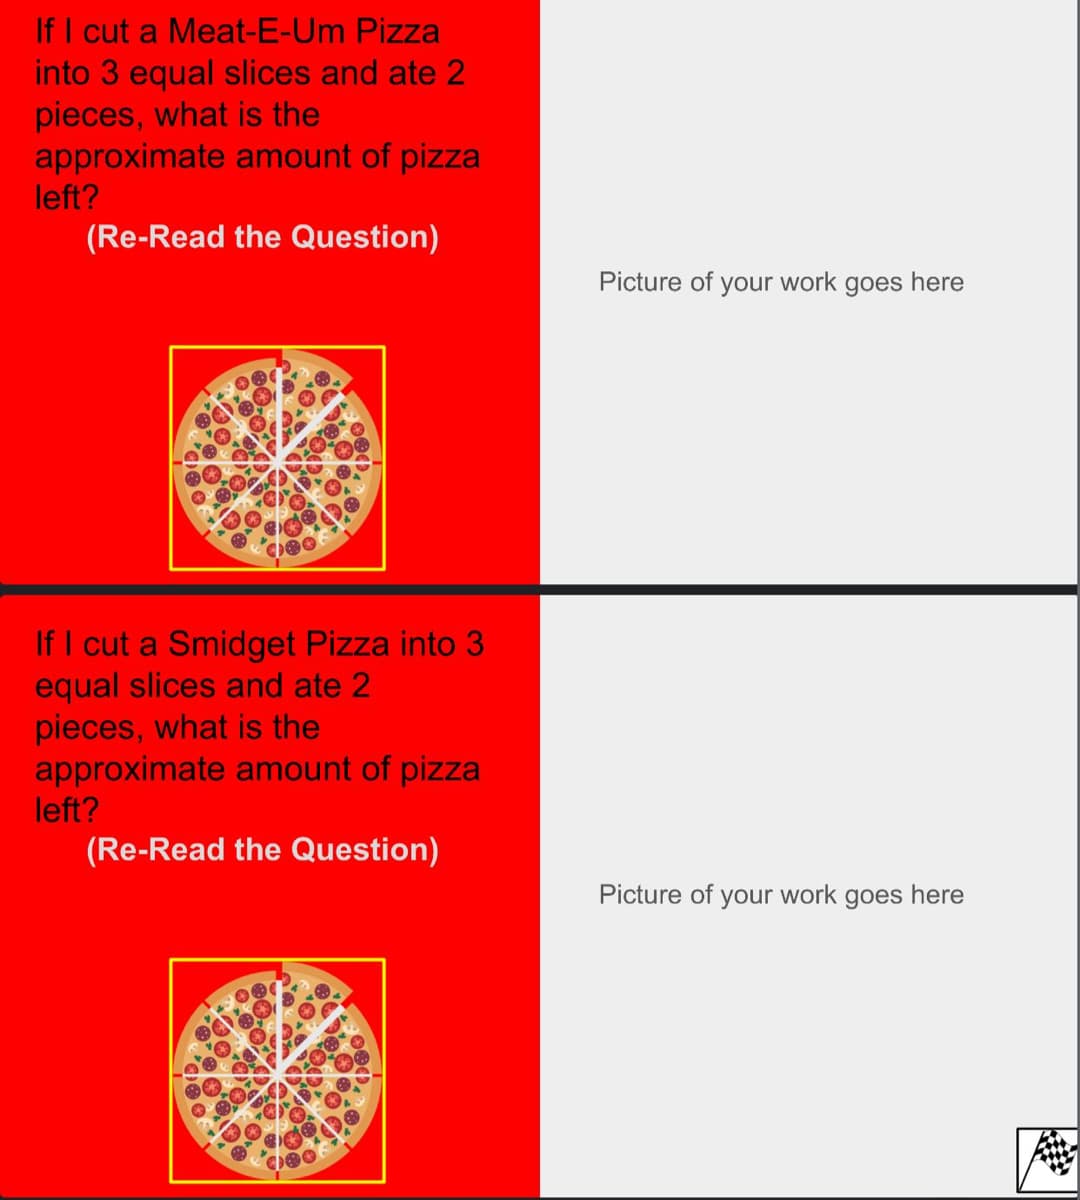 If I cut a Meat-E-Um Pizza
into 3 equal slices and ate 2
pieces, what is the
approximate amount of pizza
left?
(Re-Read the Question)
If I cut a Smidget Pizza into 3
equal slices and ate 2
pieces, what is the
approximate amount of pizza
left?
(Re-Read the Question)
Picture of your work goes here
Picture of your work goes here
20
ANG
*